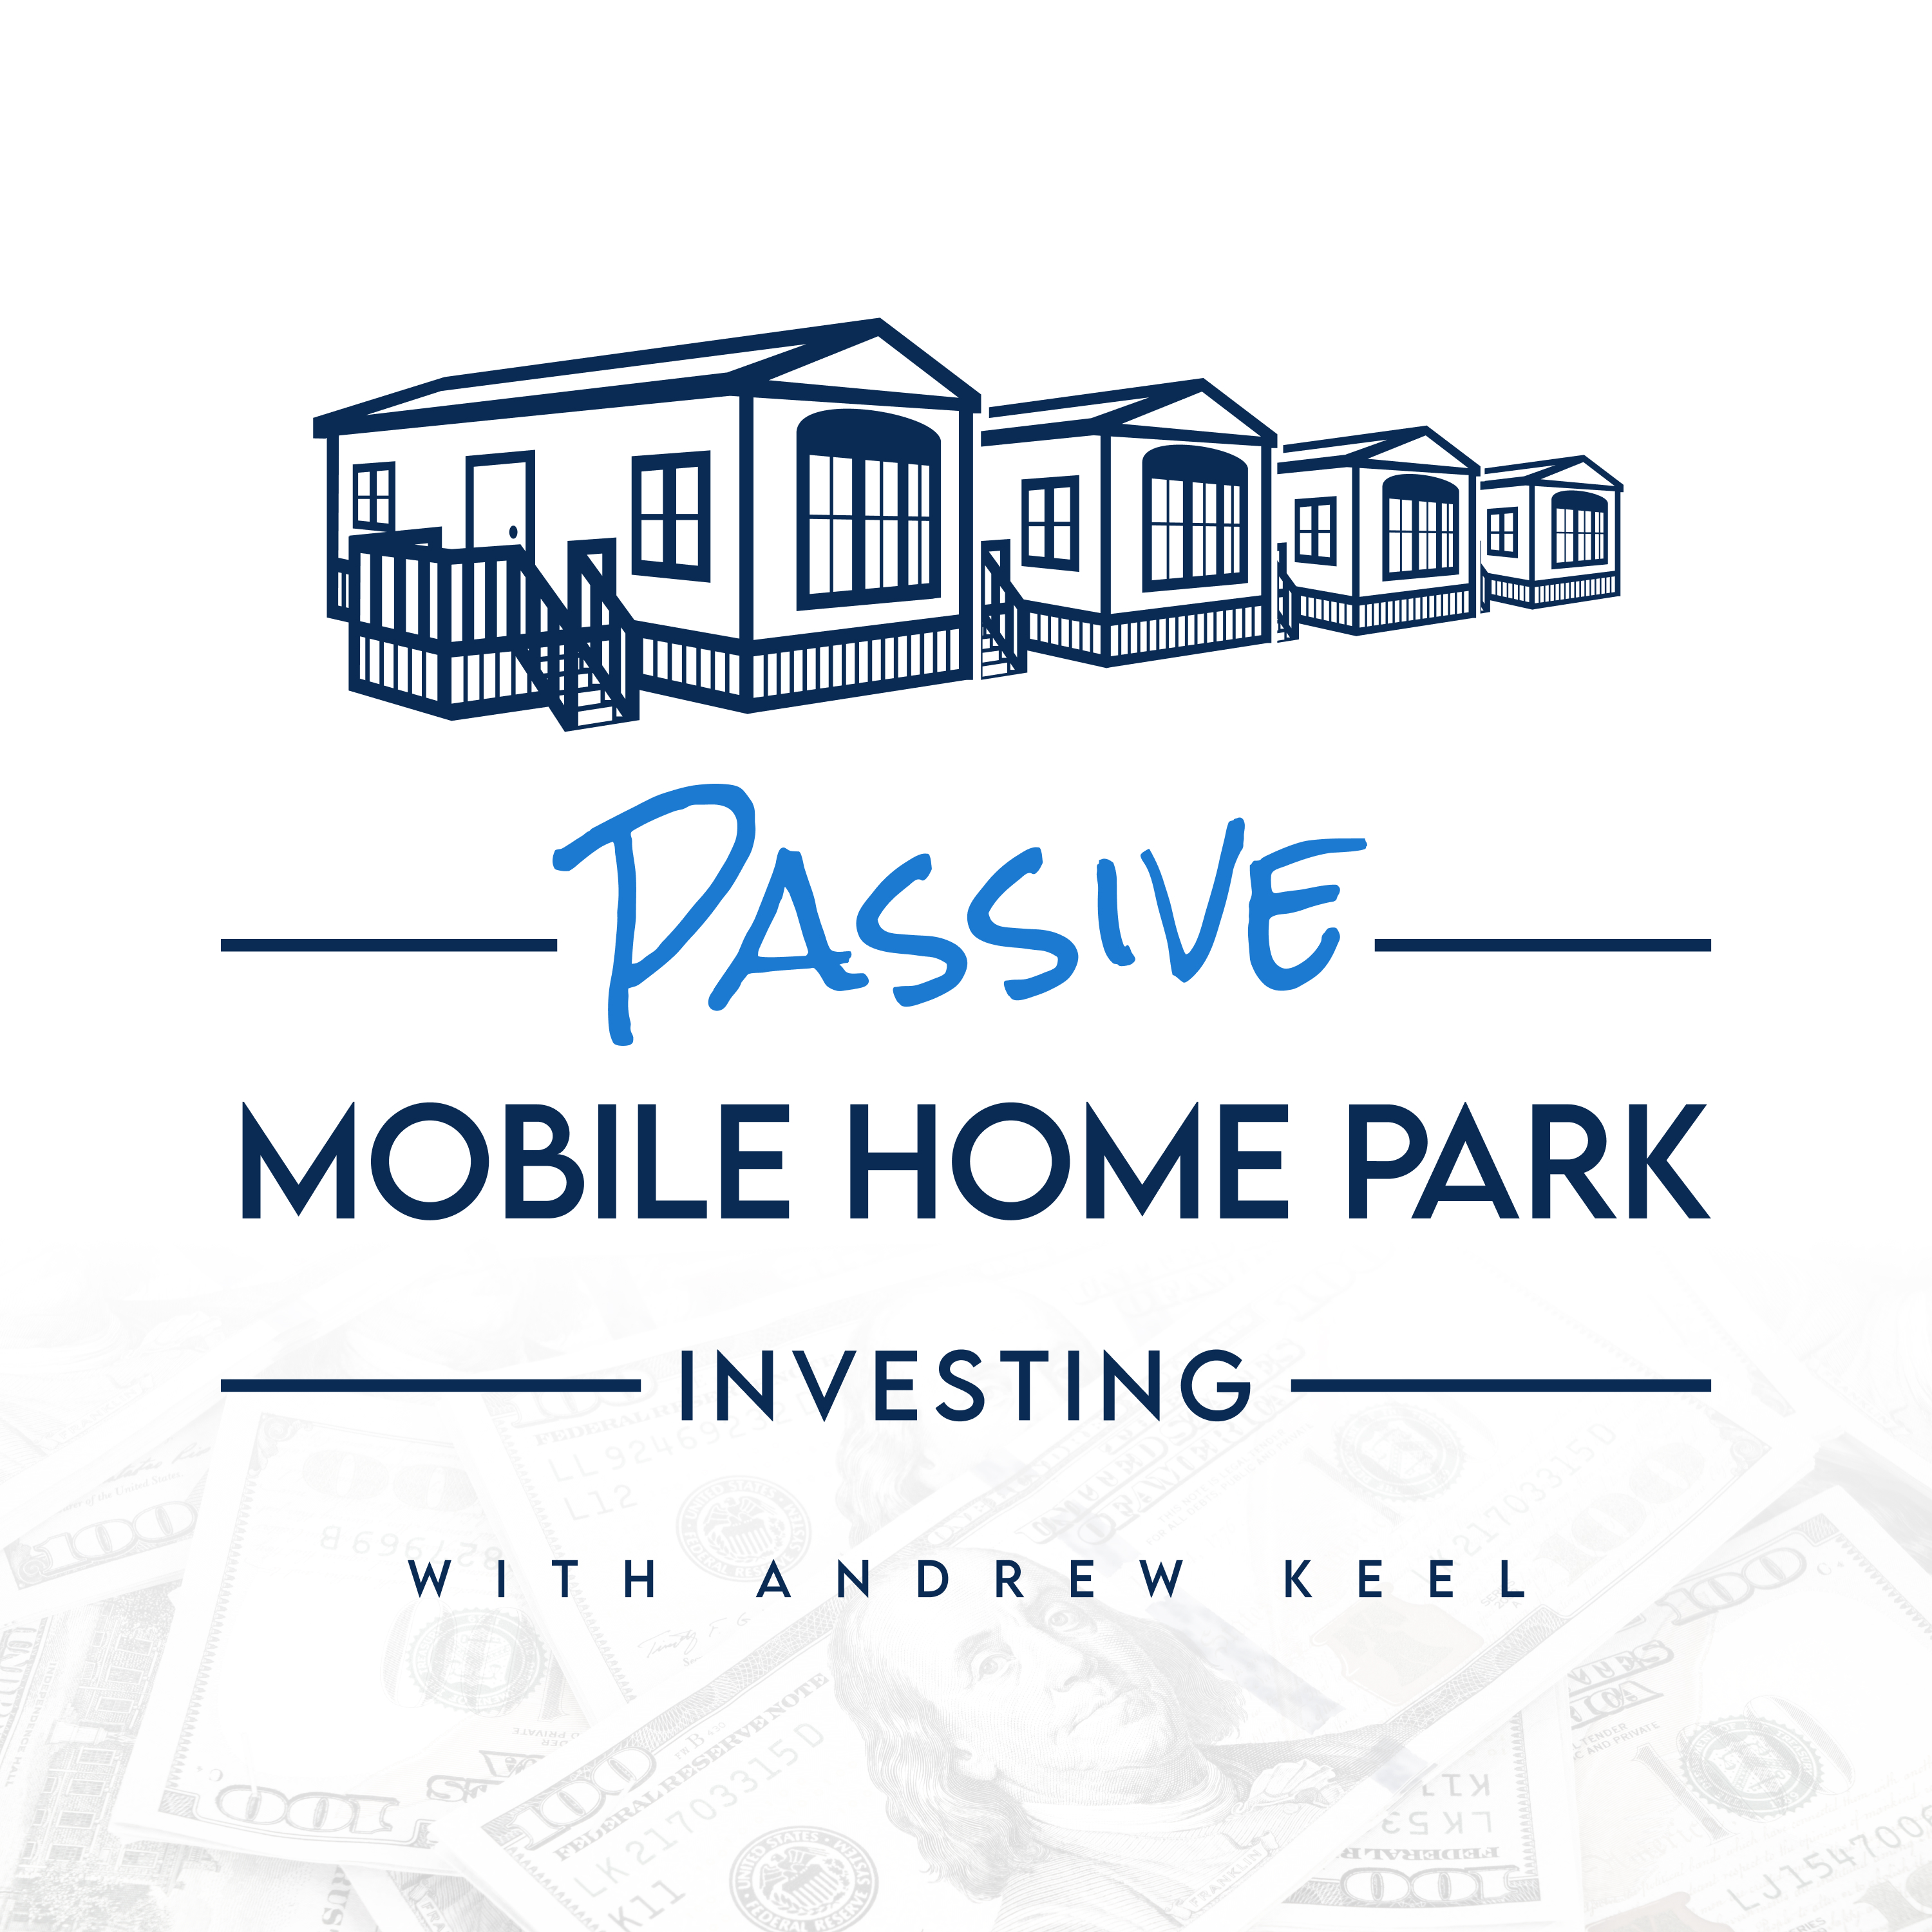 Mobile Home Parks are a Highly Fragmented Asset Class